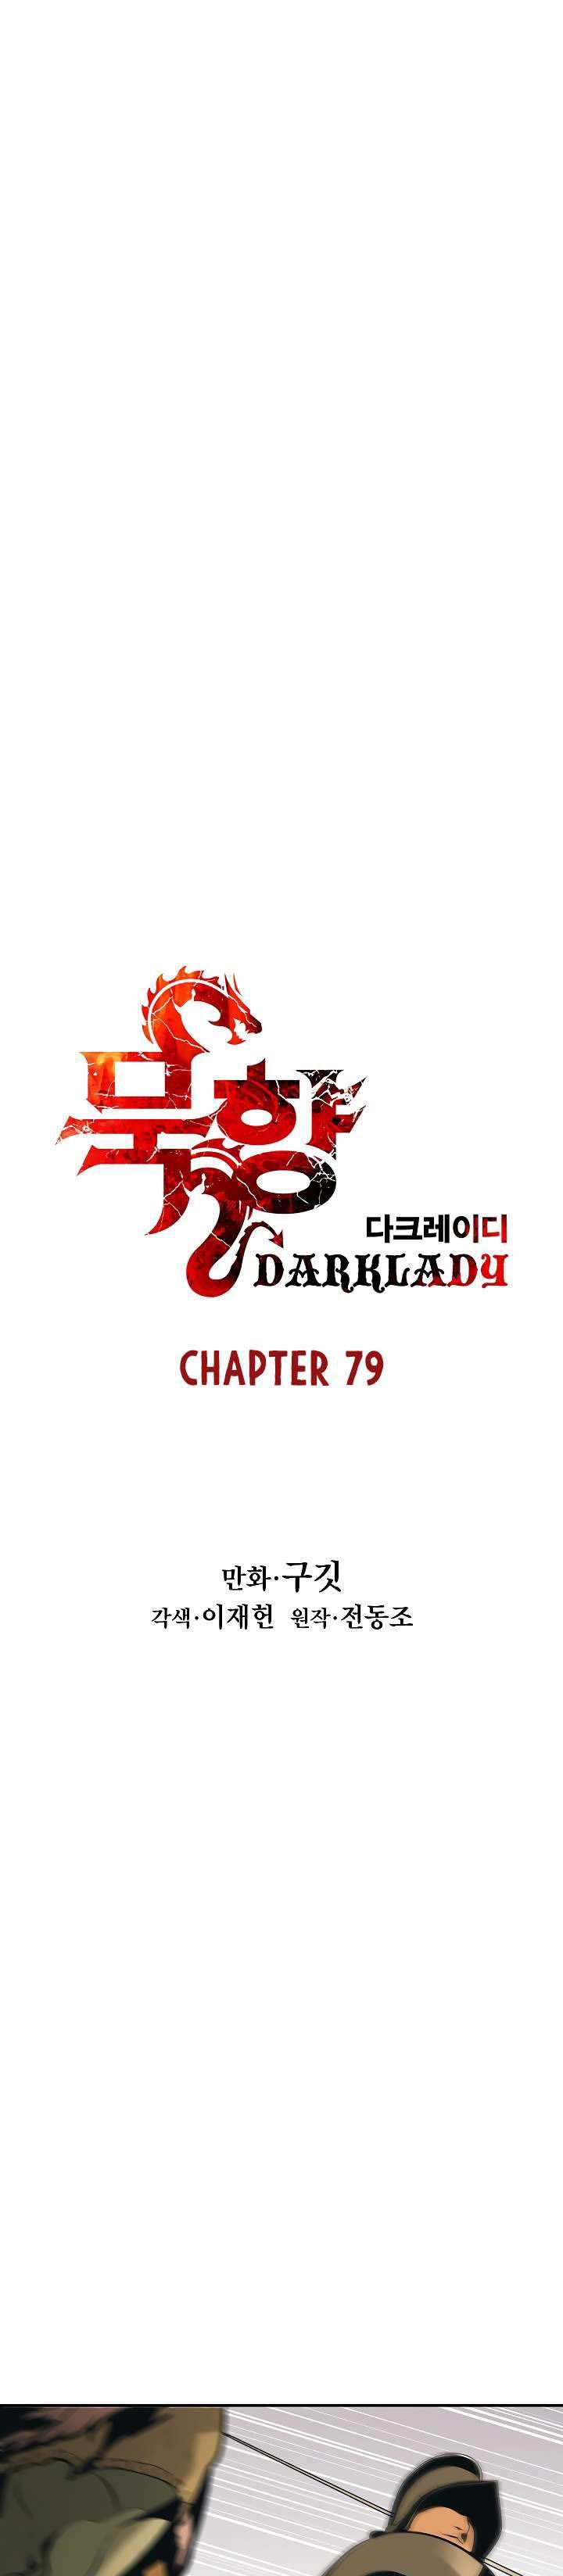 MookHyang – Dark Lady Chapter 79